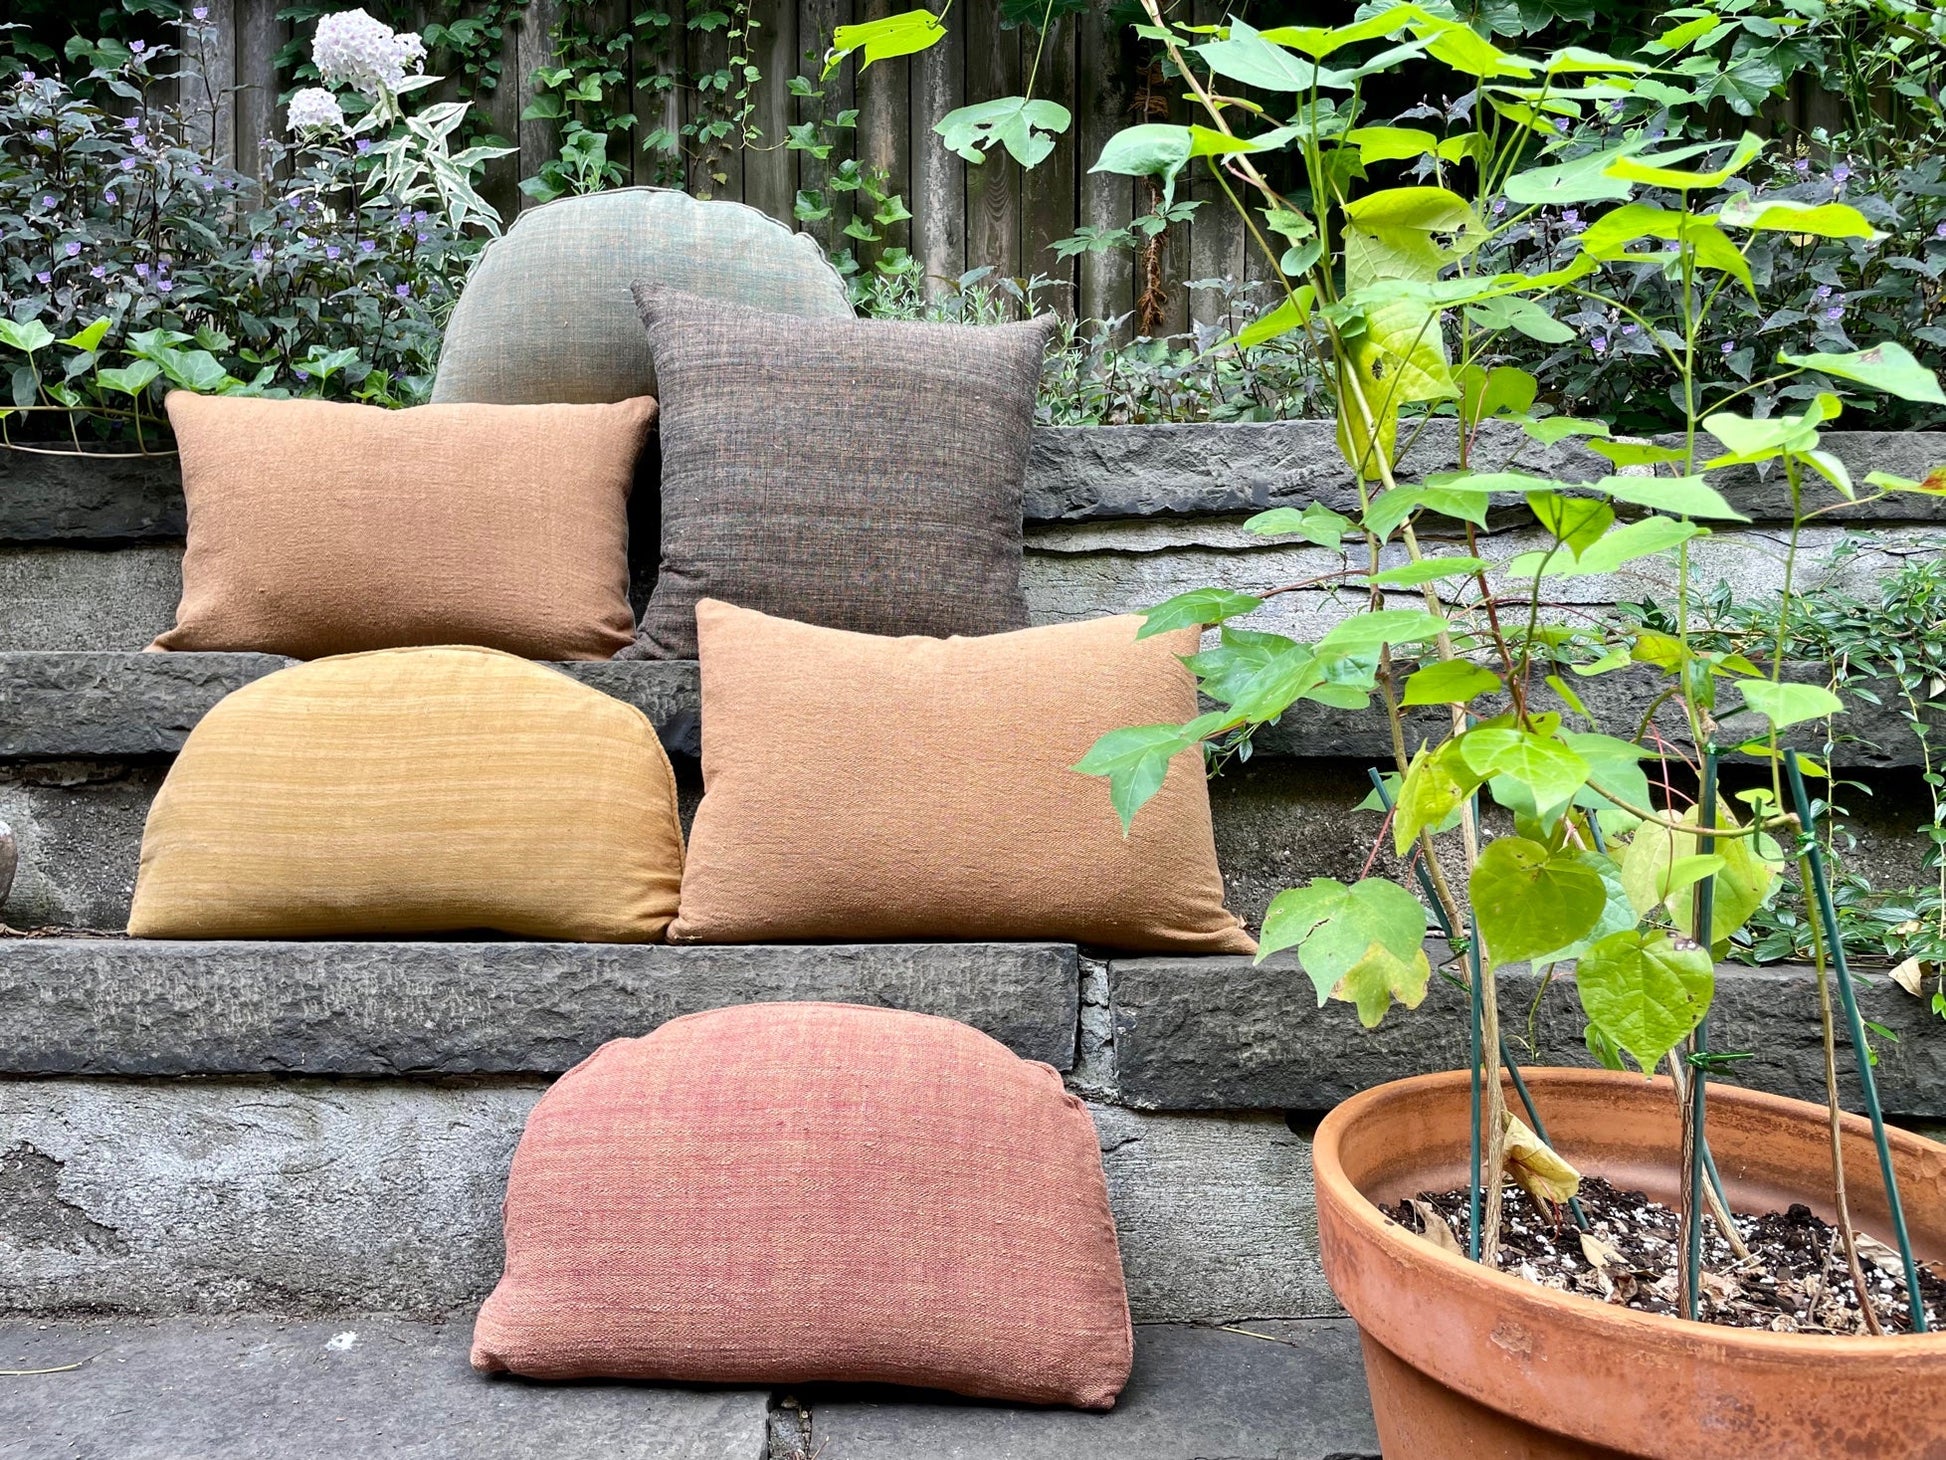 Pillow bundle - Charcoal & Brick - Behind the Hill